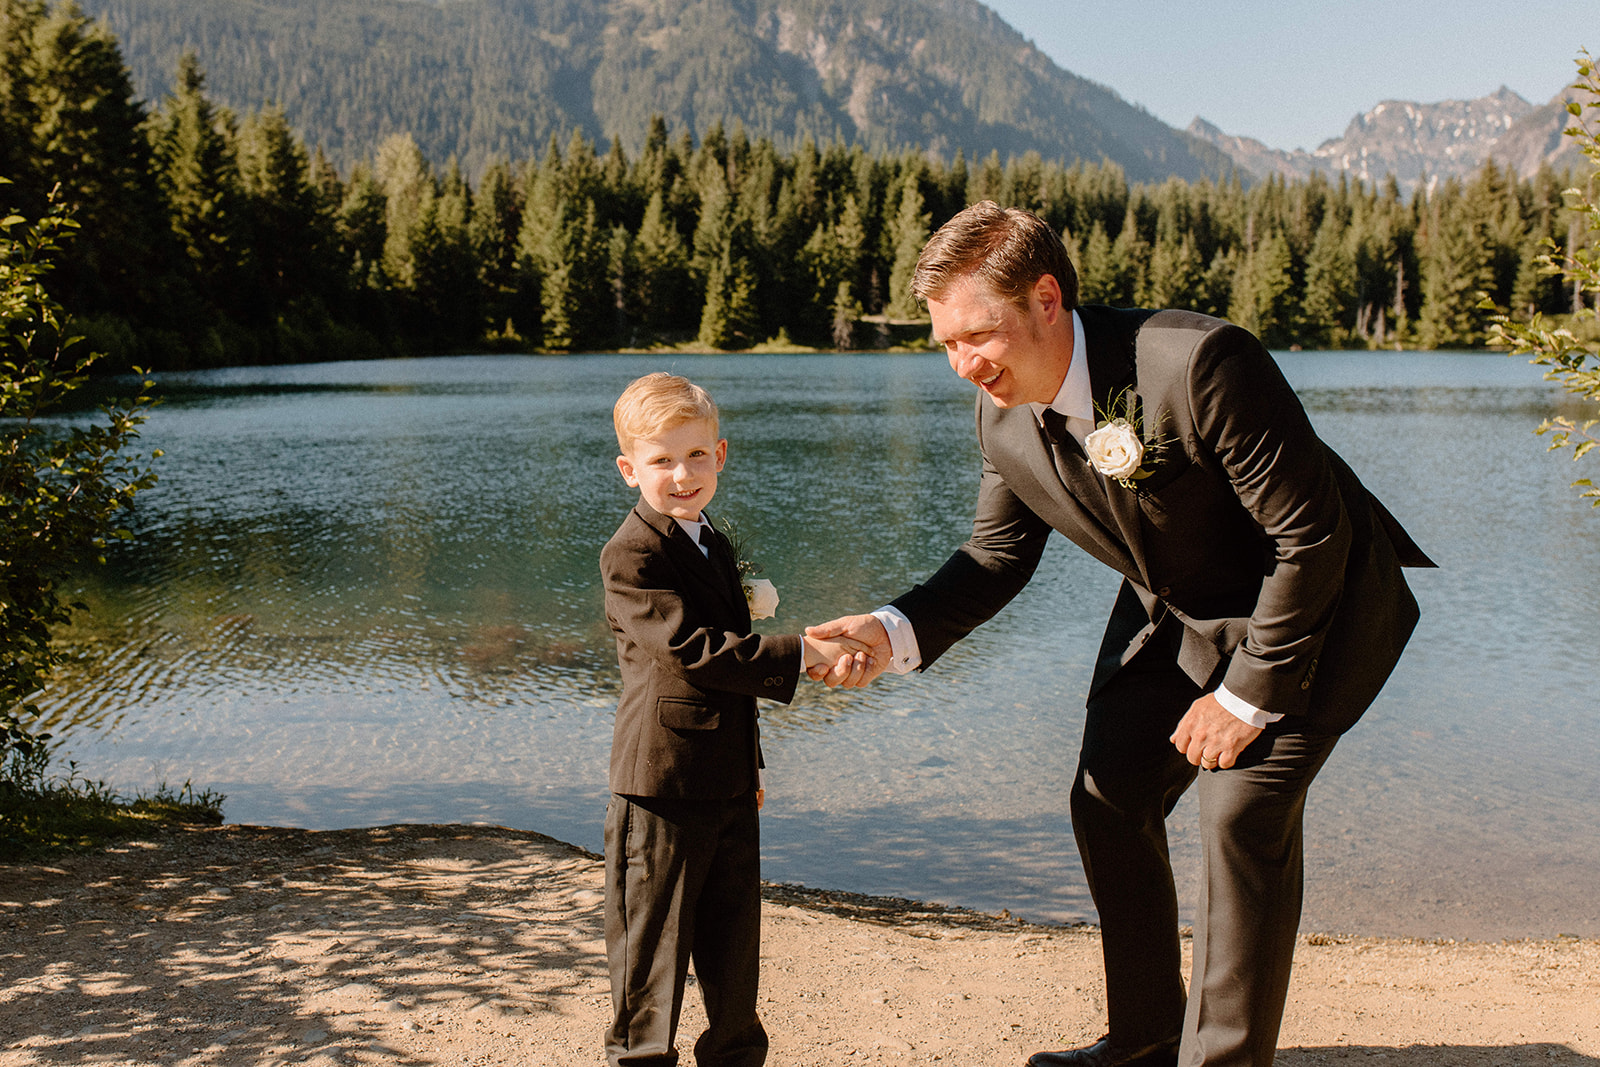 A Romantic Outdoor Wedding Day At Gold Creek Pond in Washington